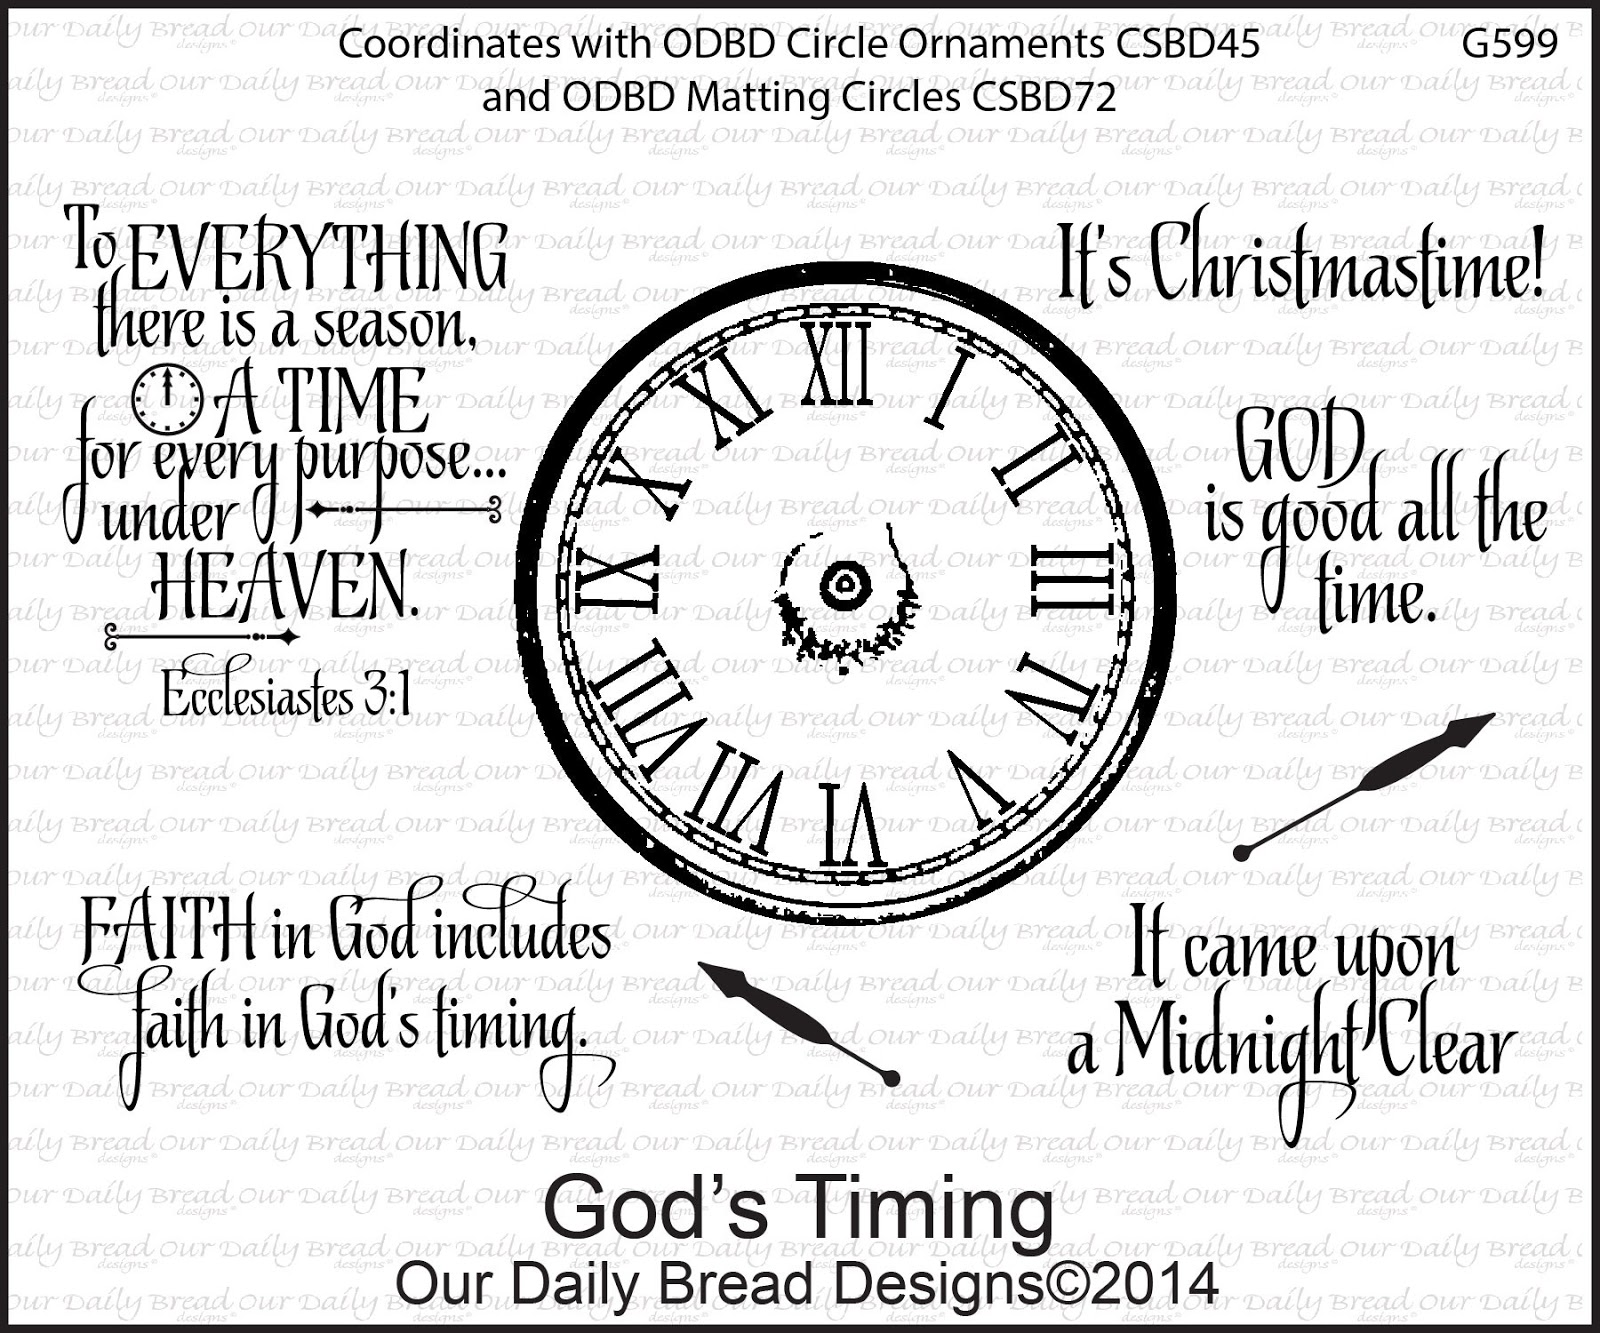 https://www.ourdailybreaddesigns.com/index.php/g599-god-s-timing.html